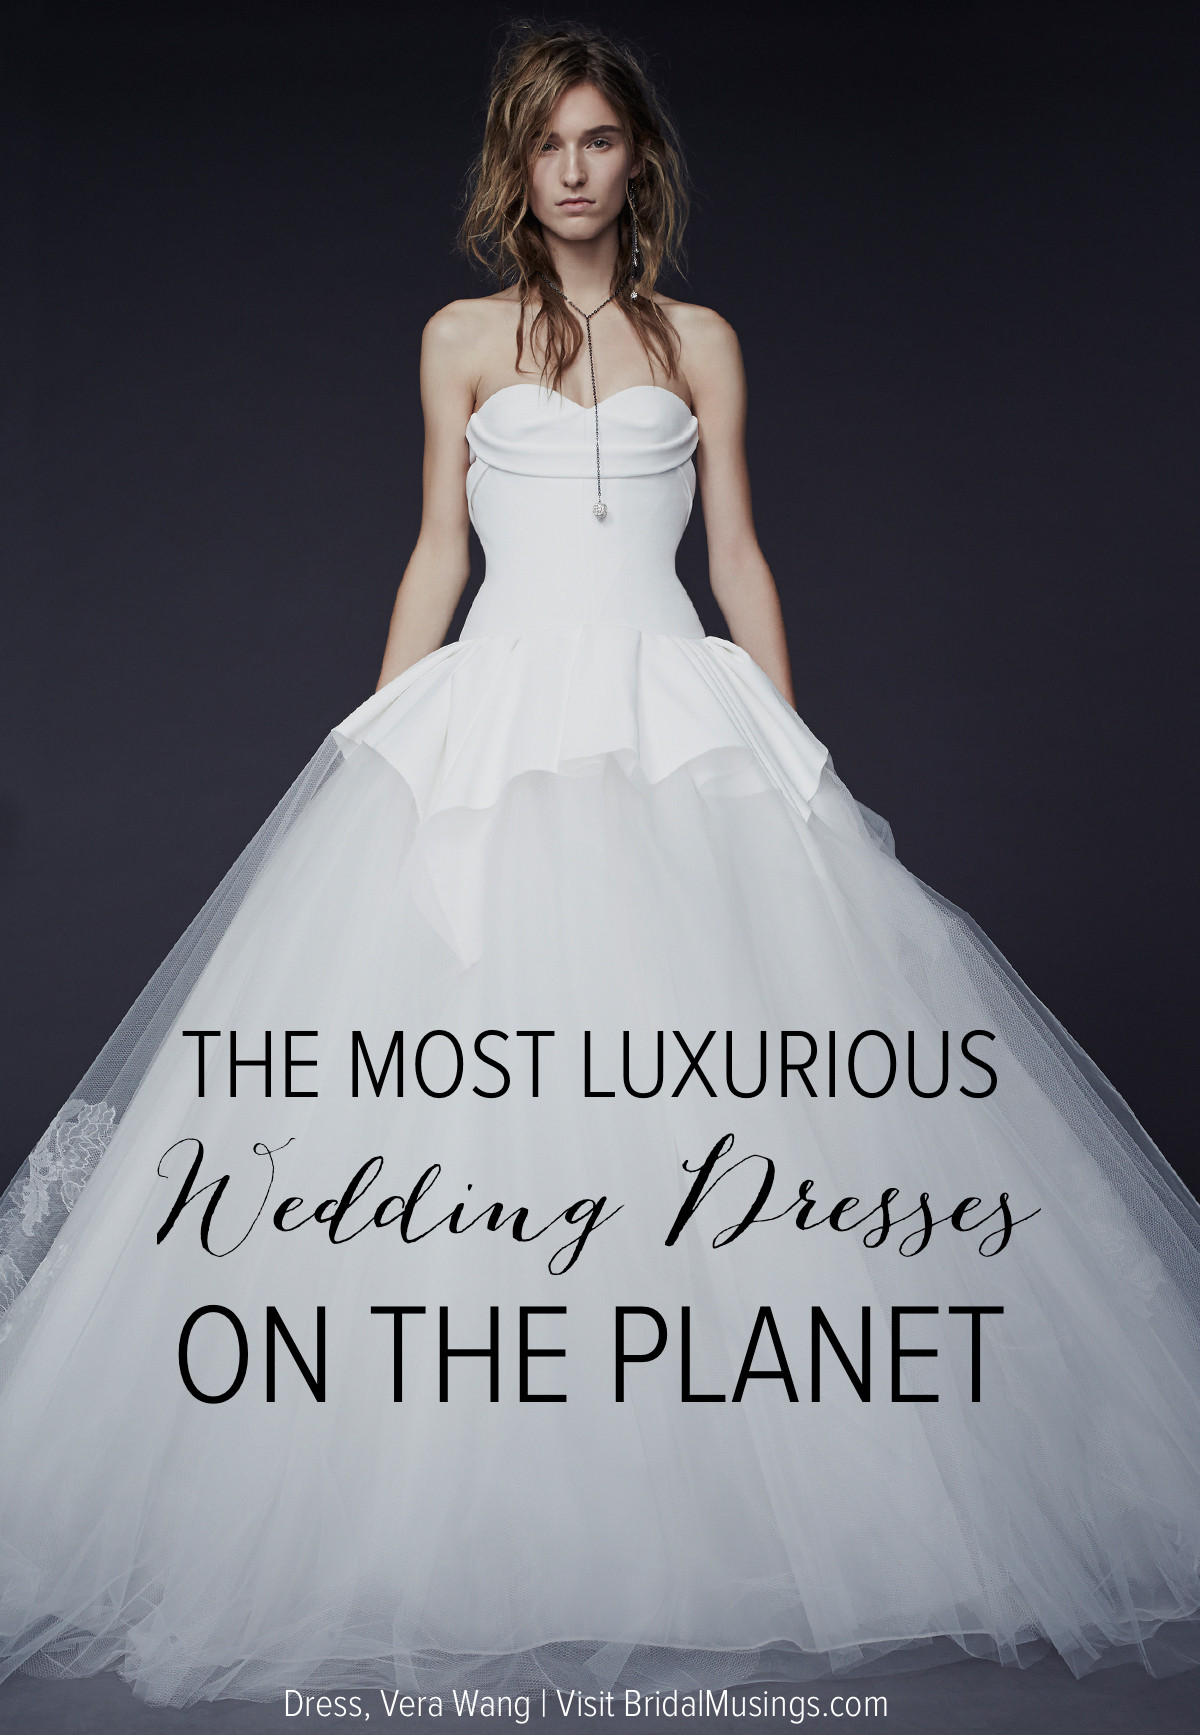 Vera Wang Wedding Dress Prices
 How Much Does a Wedding Dress Cost The Couture Edition